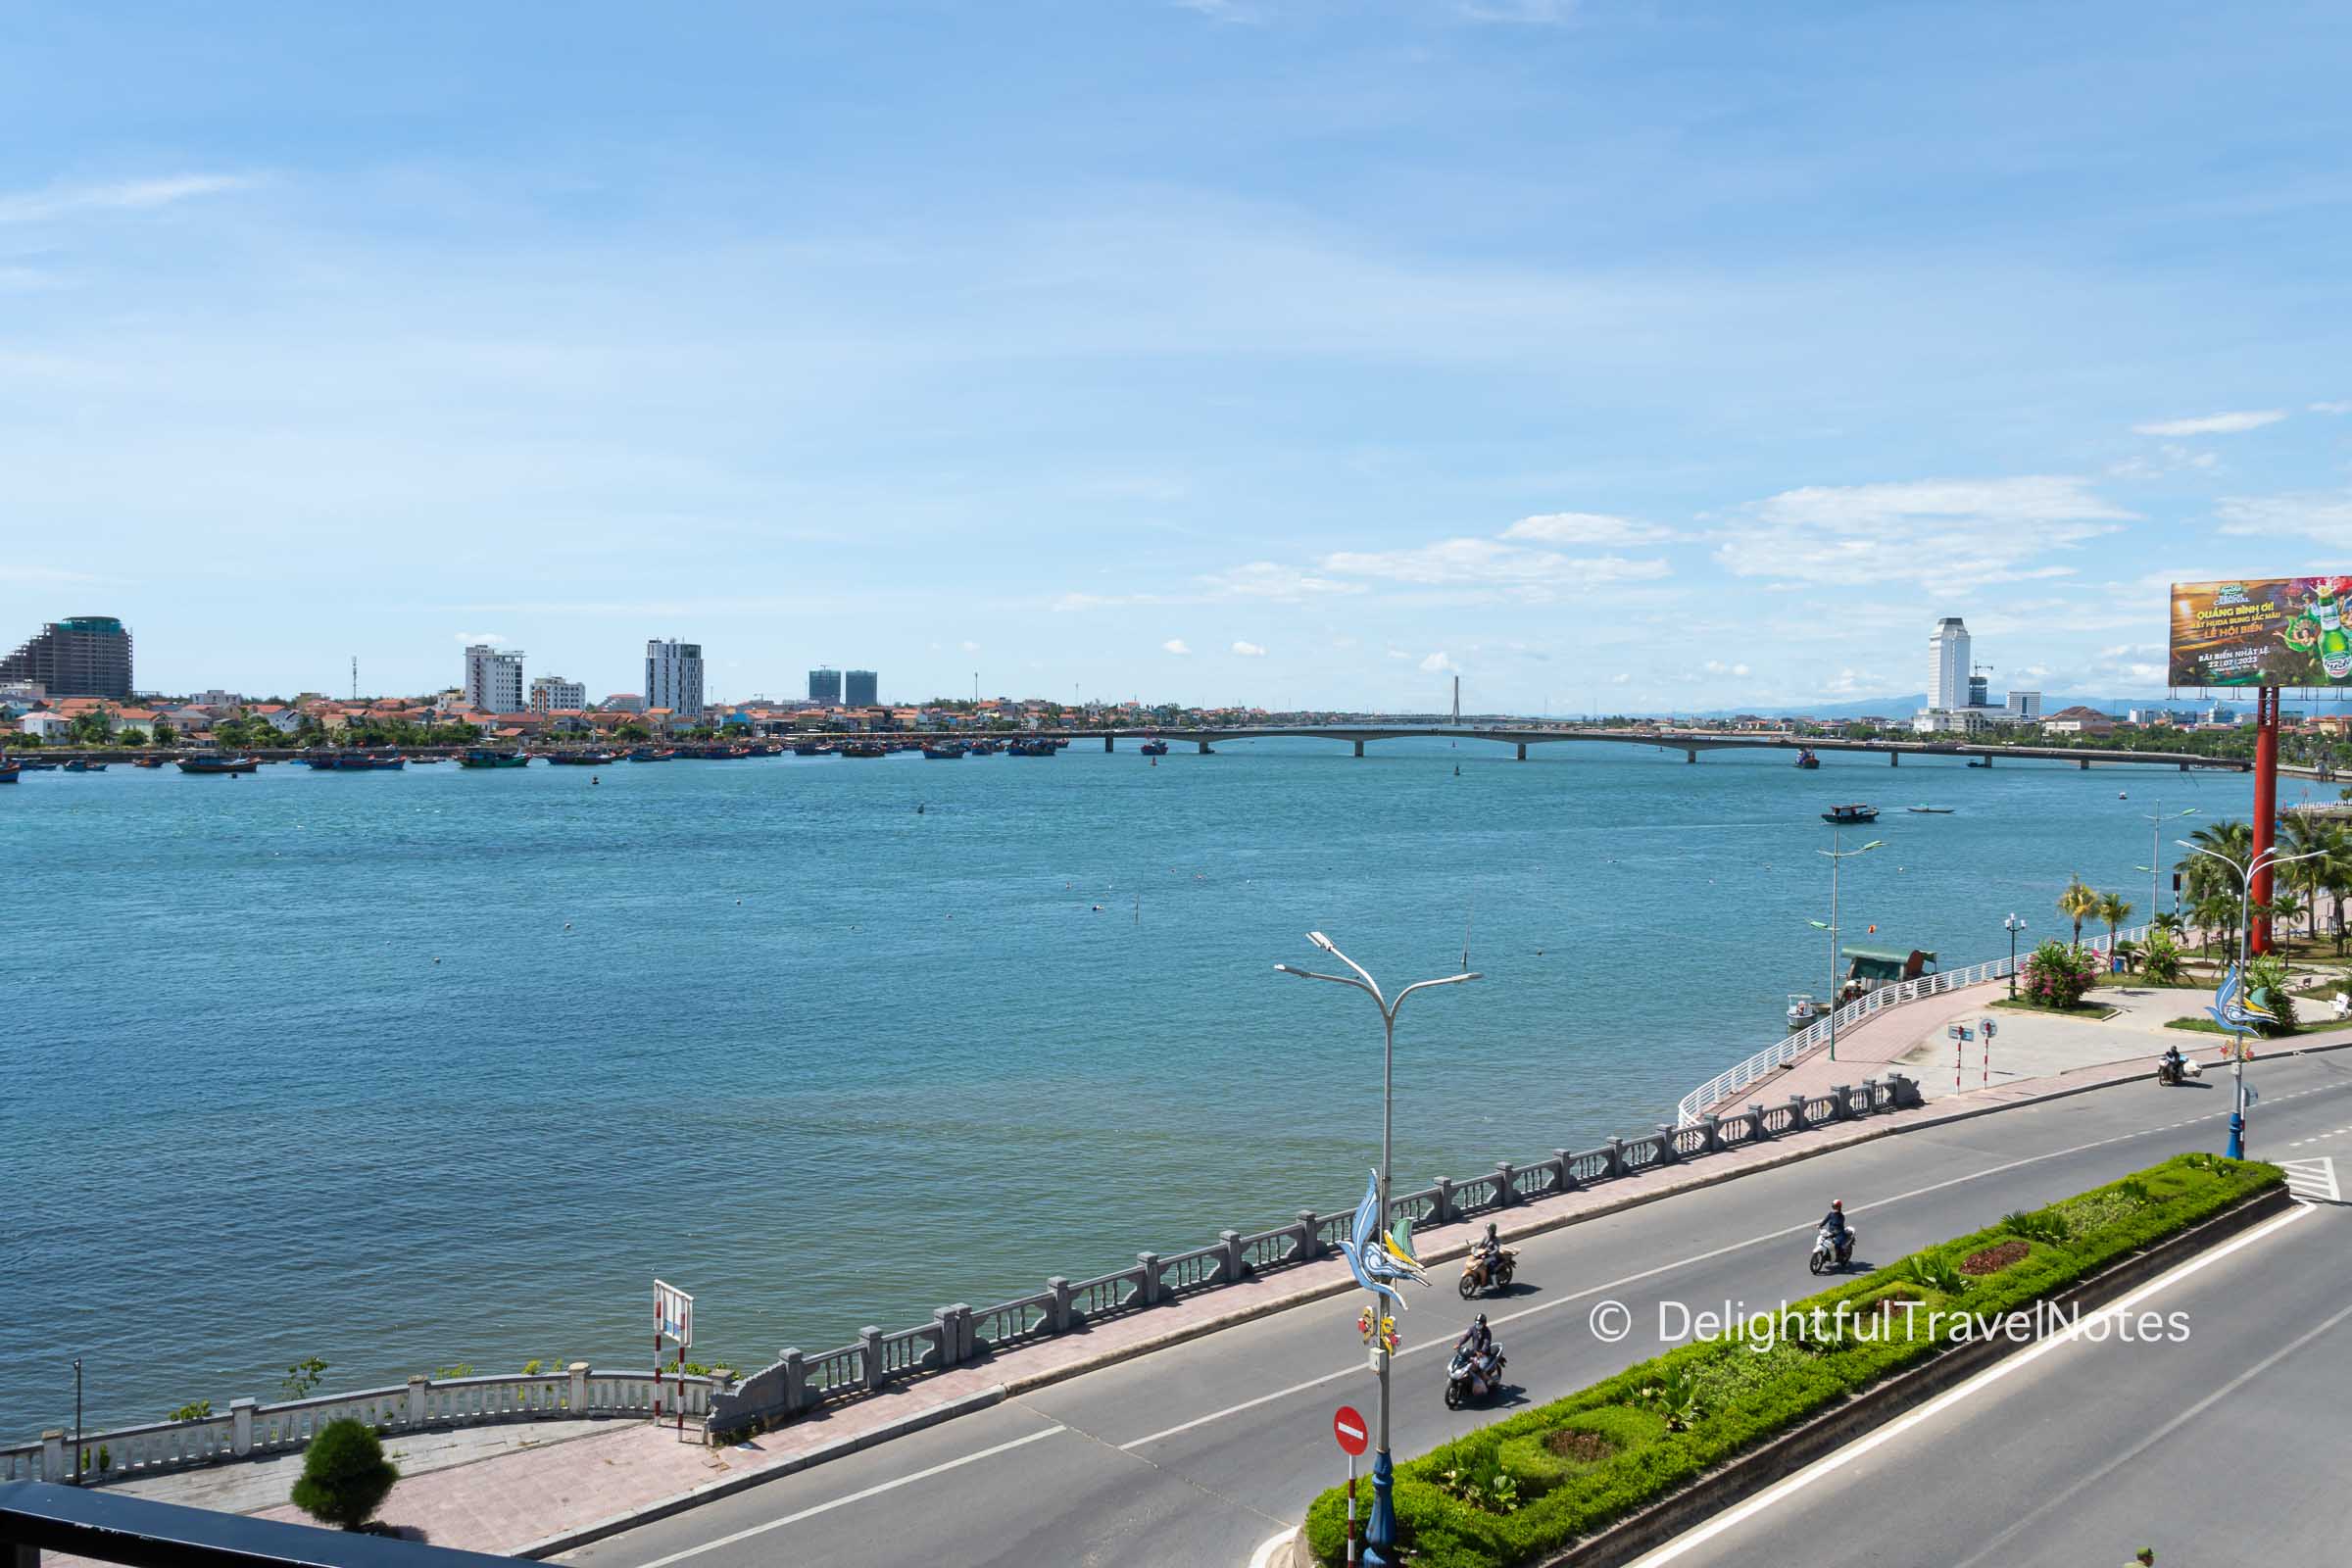 View of Nhat Le river and Nhat Le bridge in Dong Hoi city, Quang Binh province.